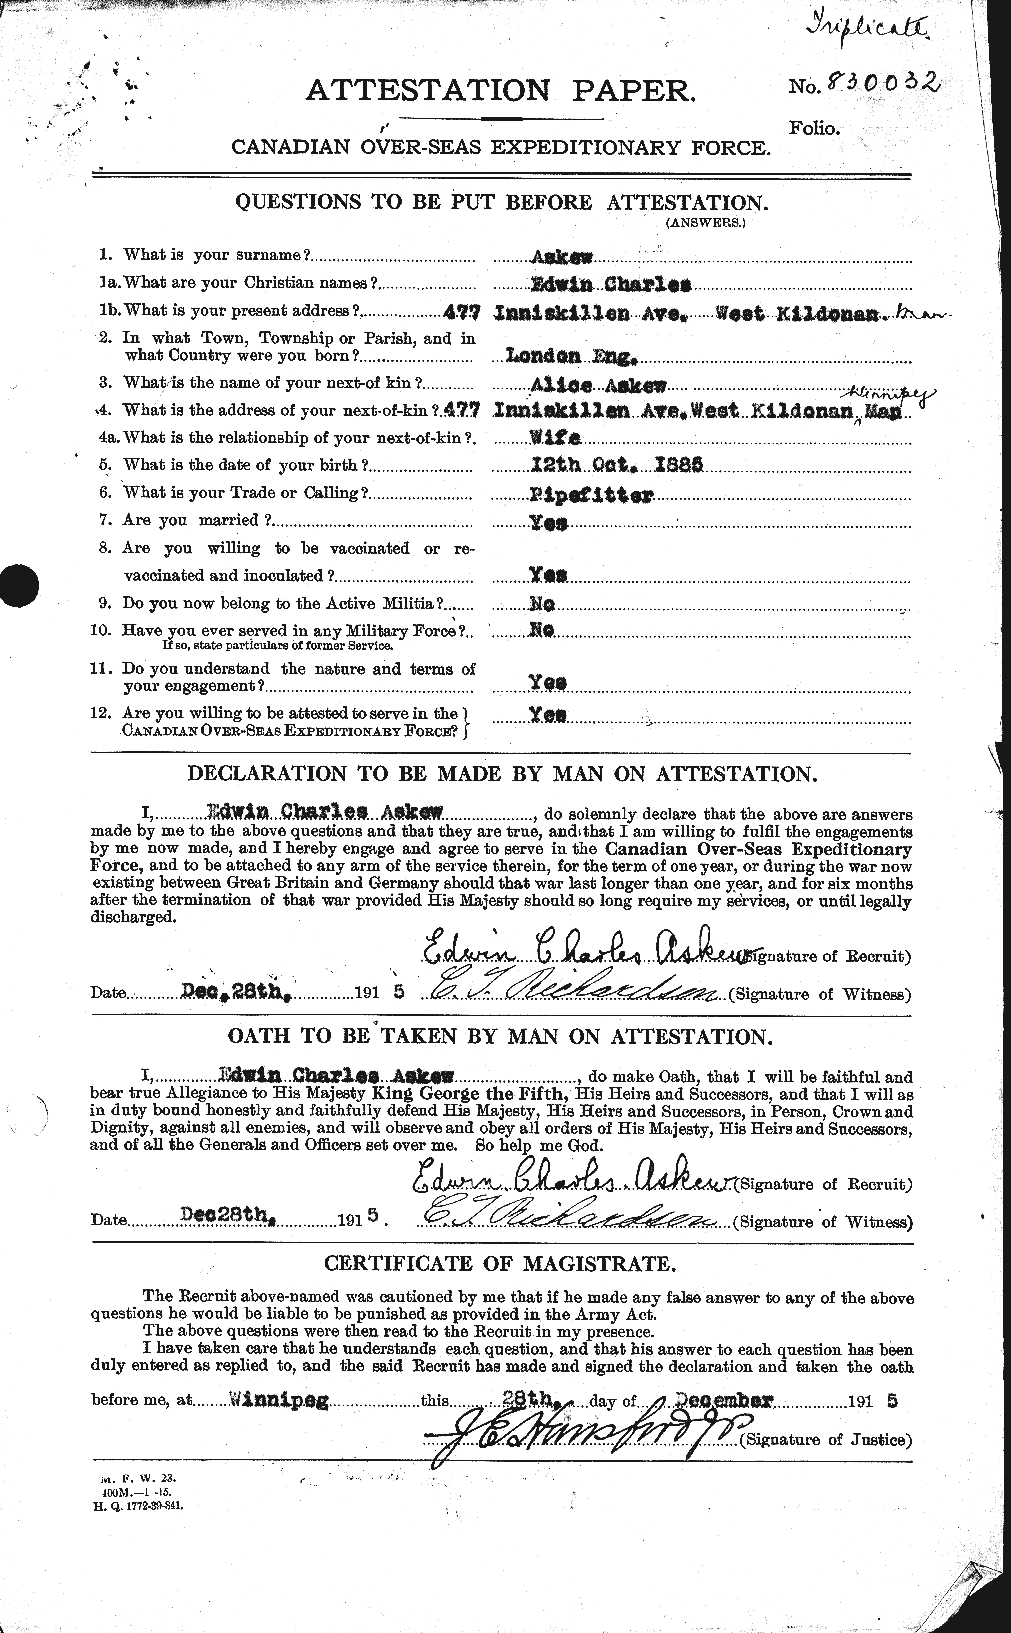 Personnel Records of the First World War - CEF 223683a